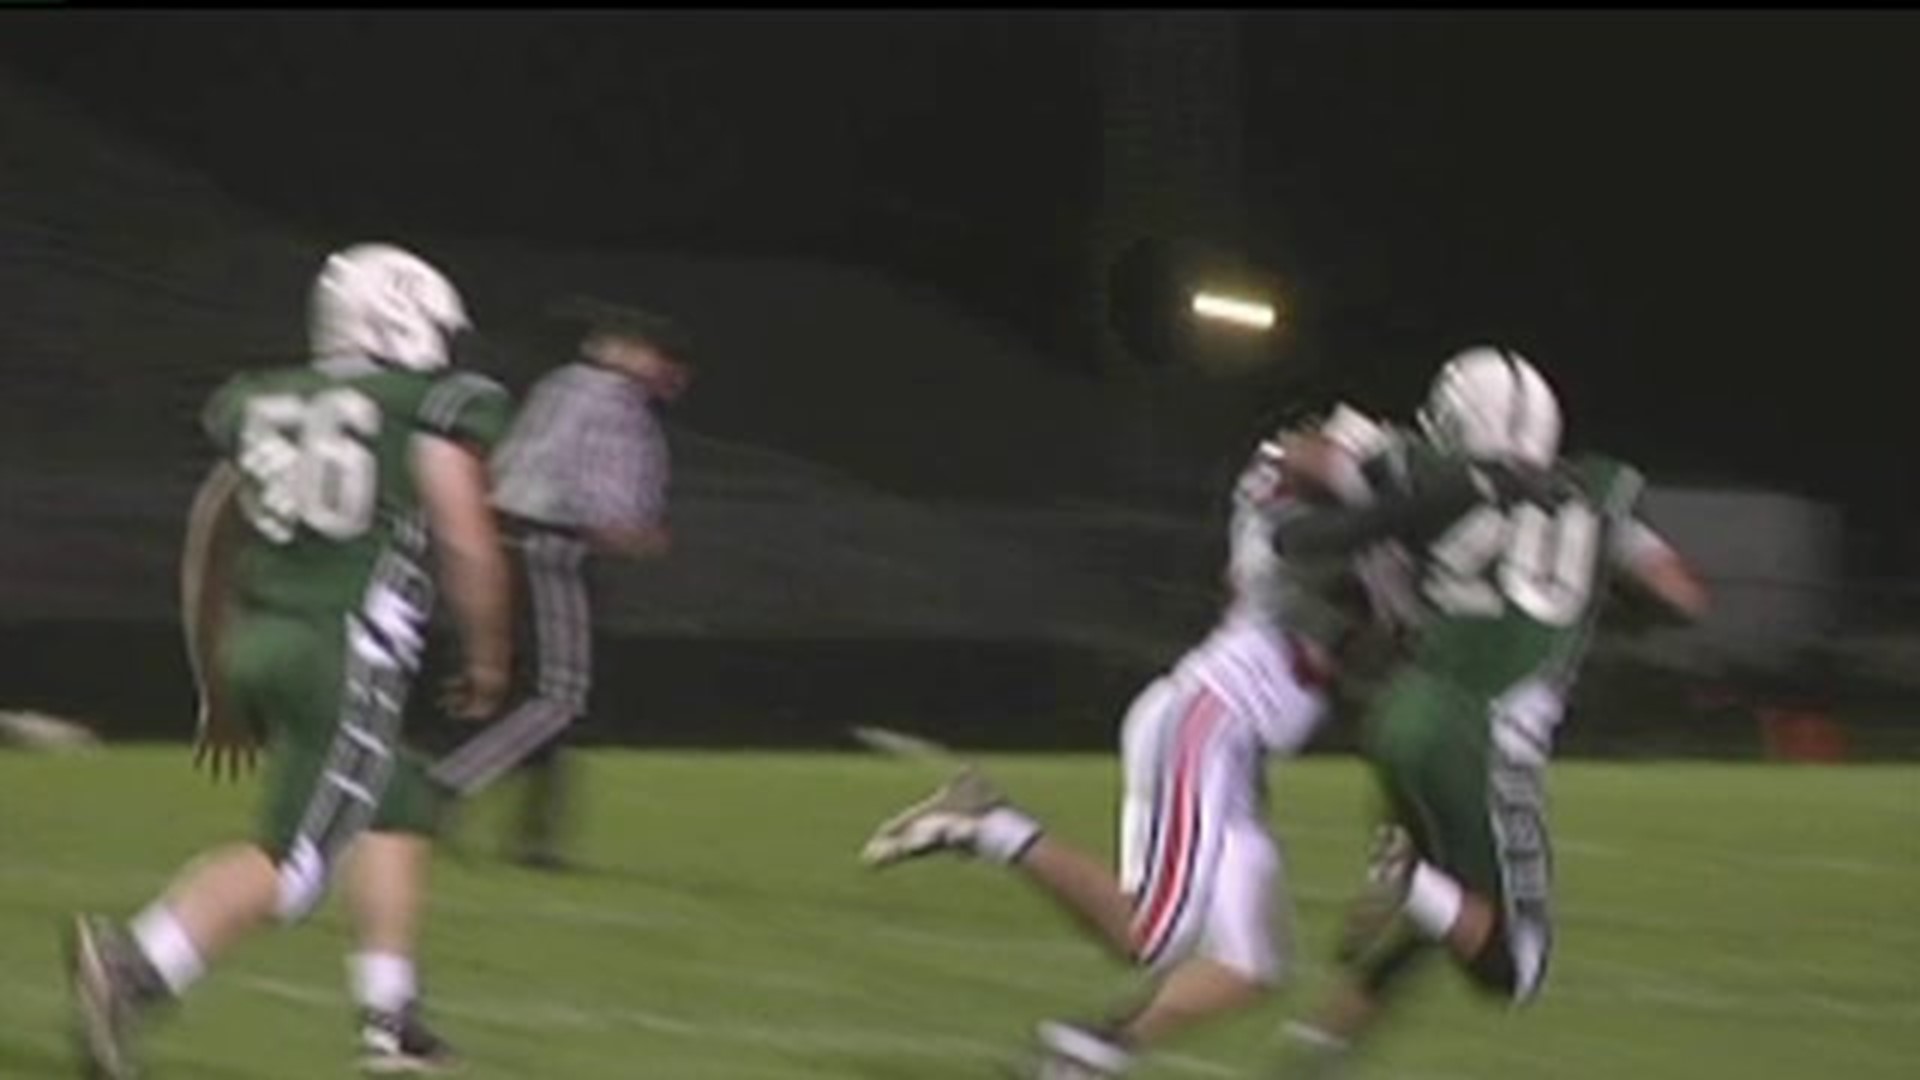 United Township falls to Richwoods